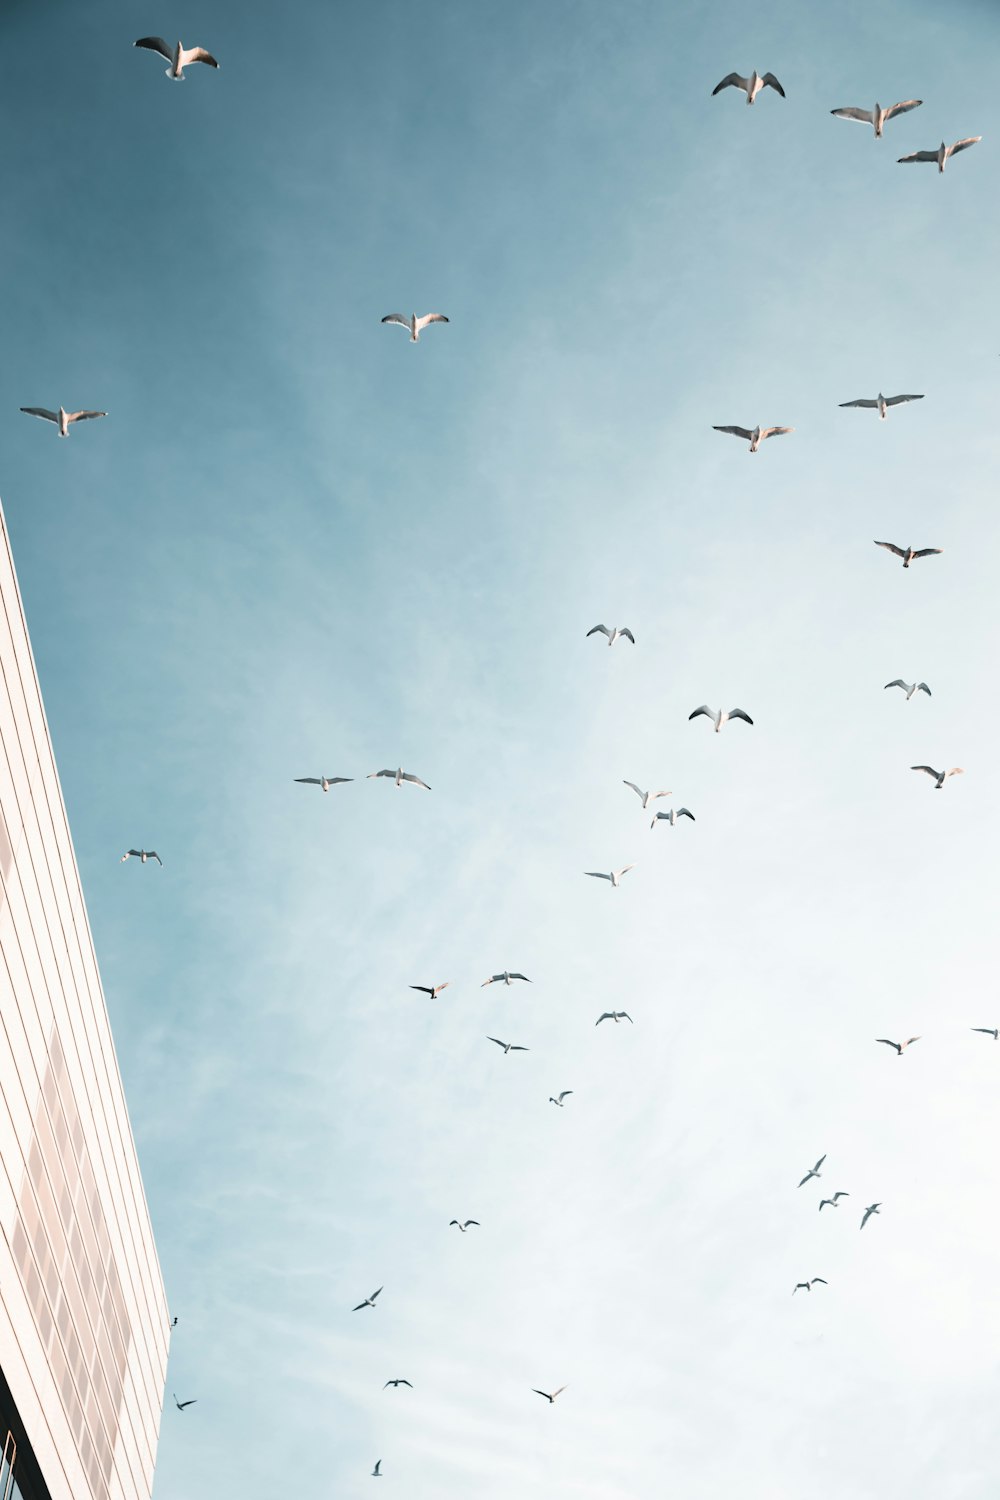 a flock of birds flying over a tall building